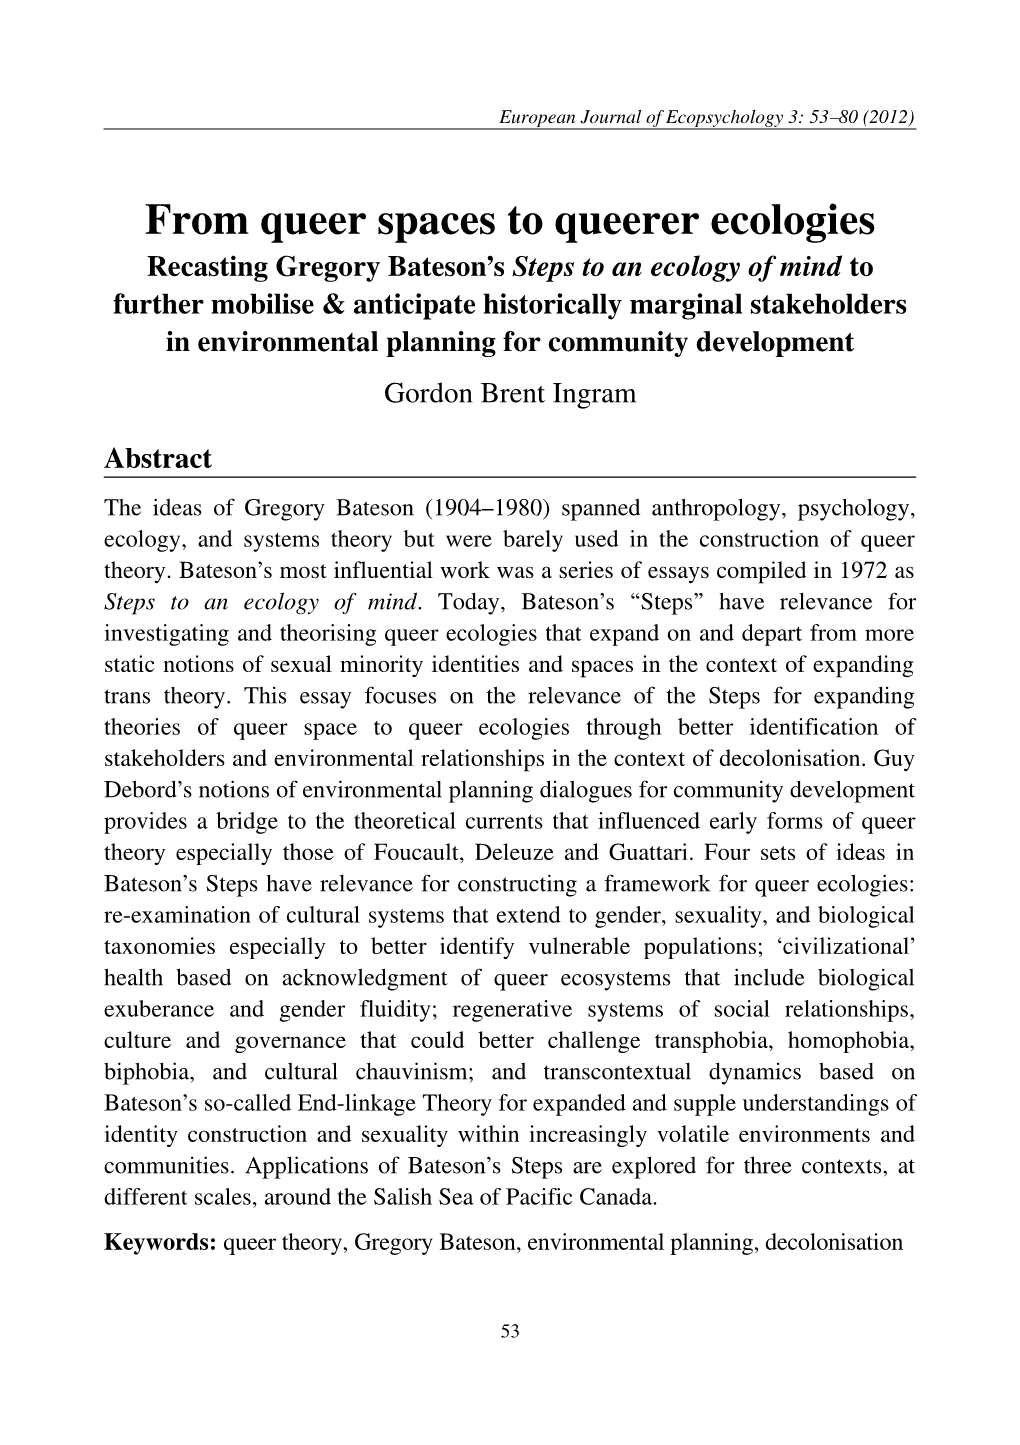 From Queer Spaces to Queerer Ecologies